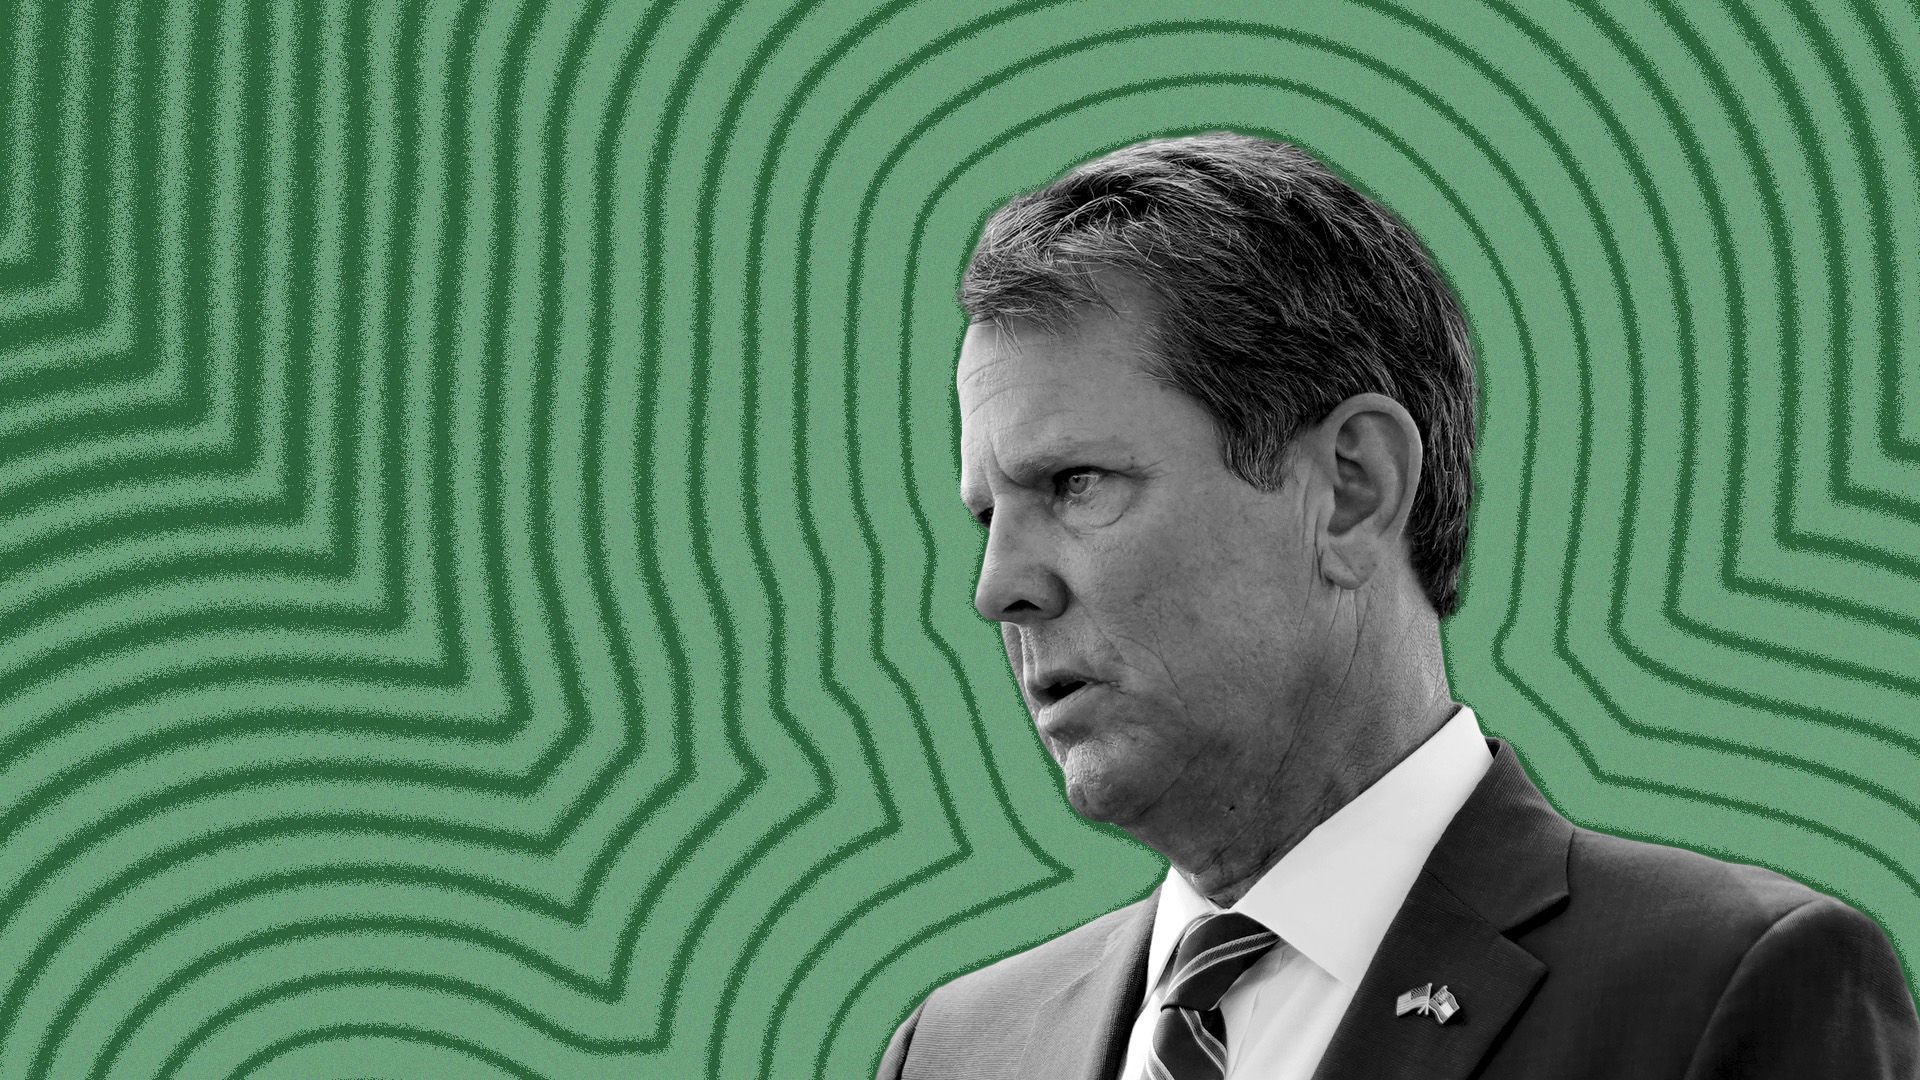 Photo illustration of Georgia Governor Brian Kemp with lines radiating from him.